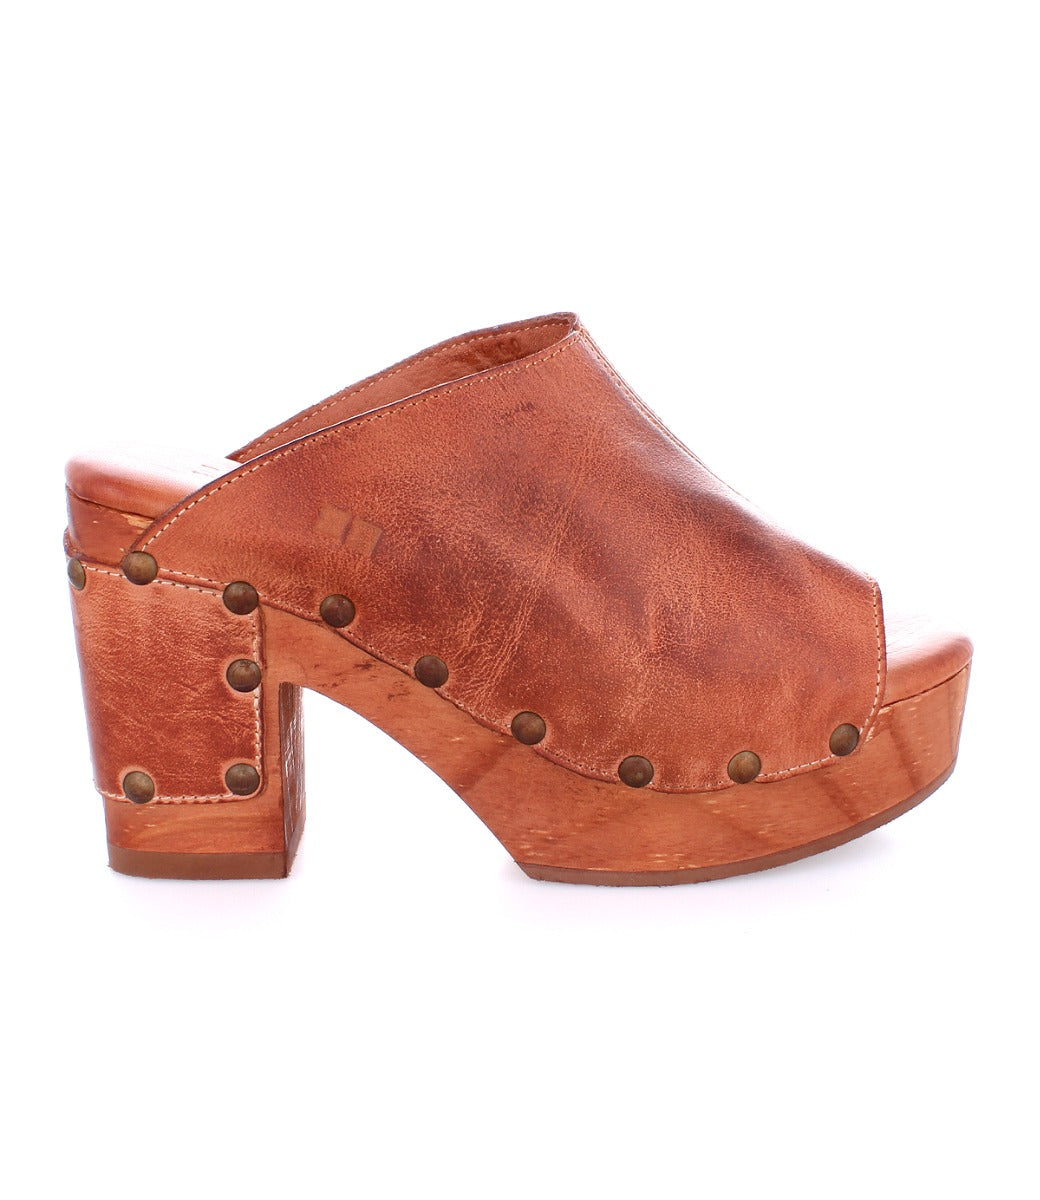 A women's Bed Stu Deva brown leather mule with studded heels.